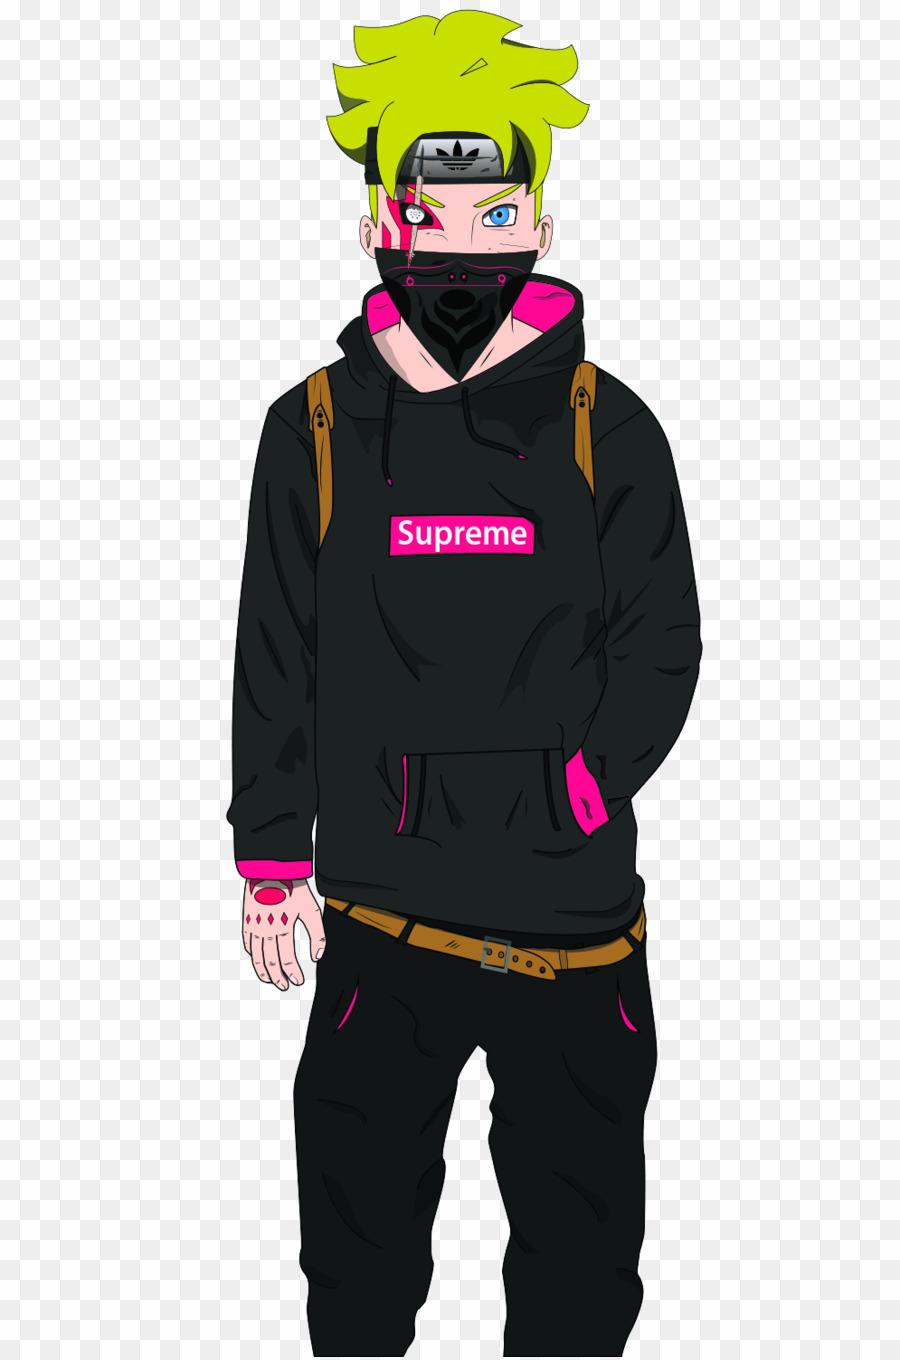 Draw your car or make a hypebeast anime character by Valdosart | Fiverr